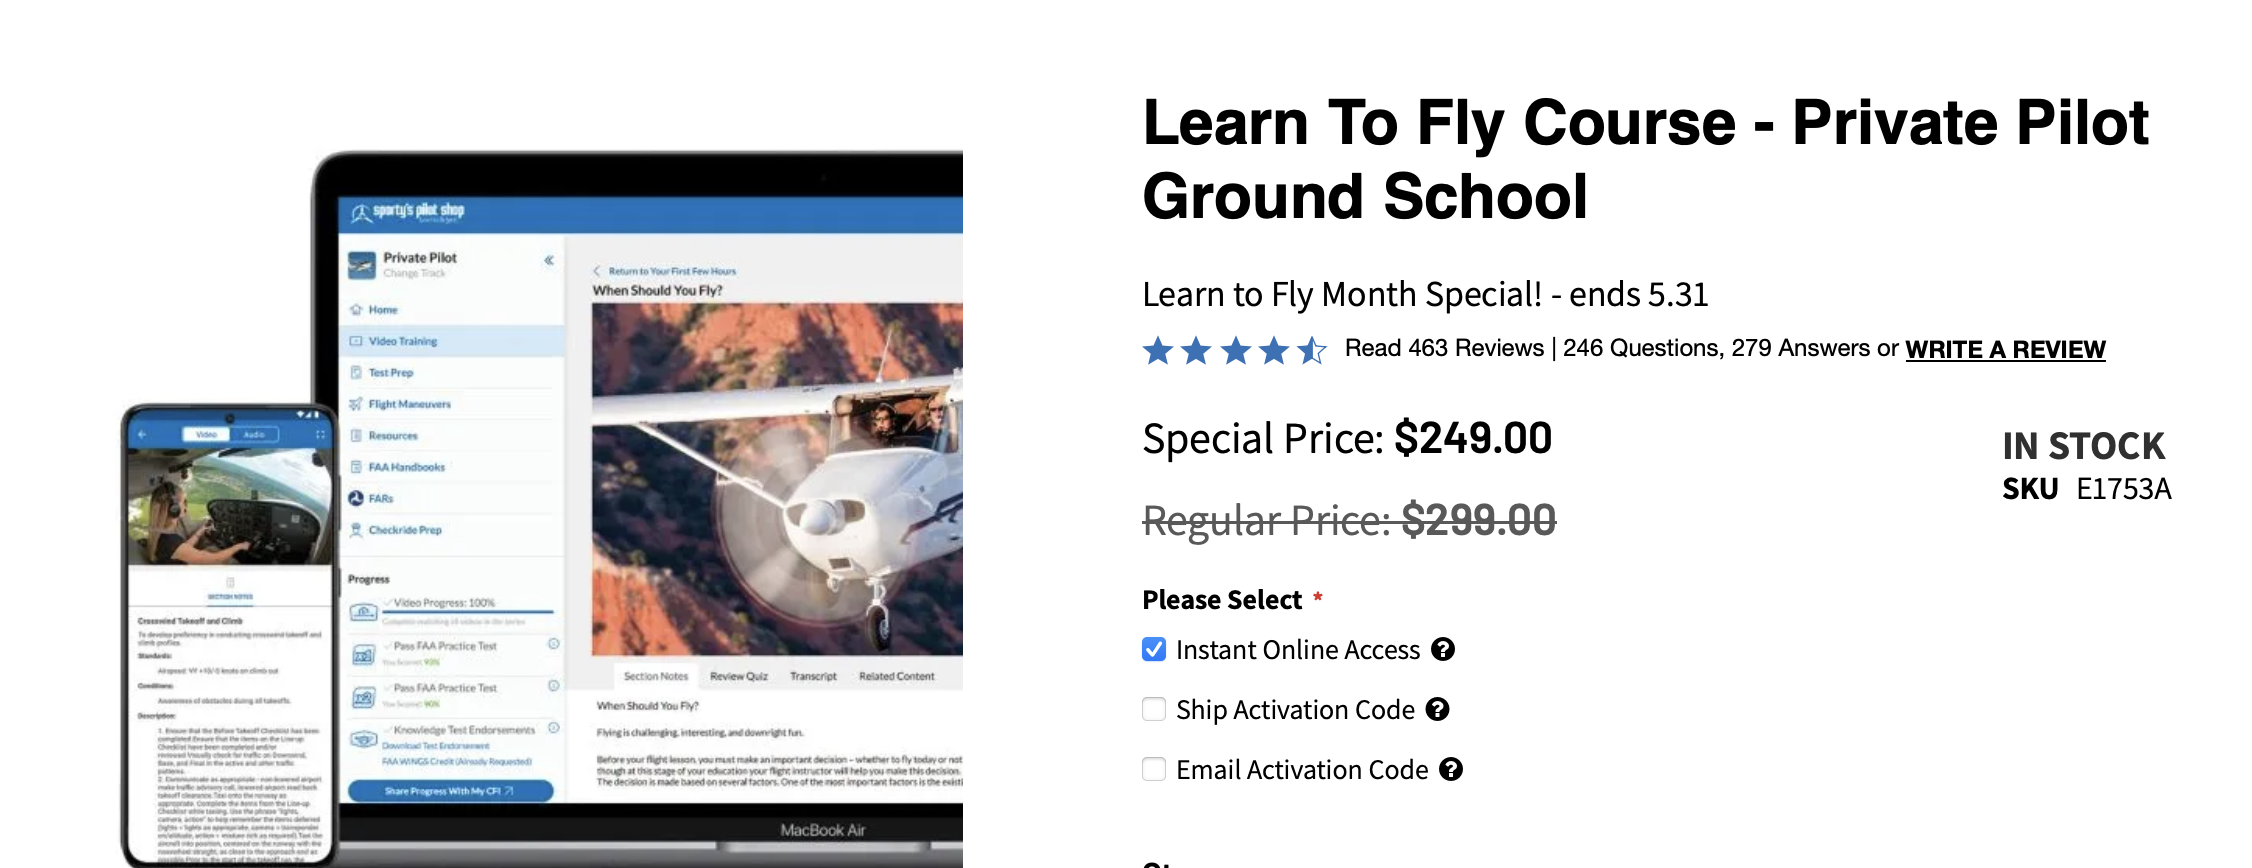 Sporty's Learn To Fly Course - Private Pilot Ground School Course $249